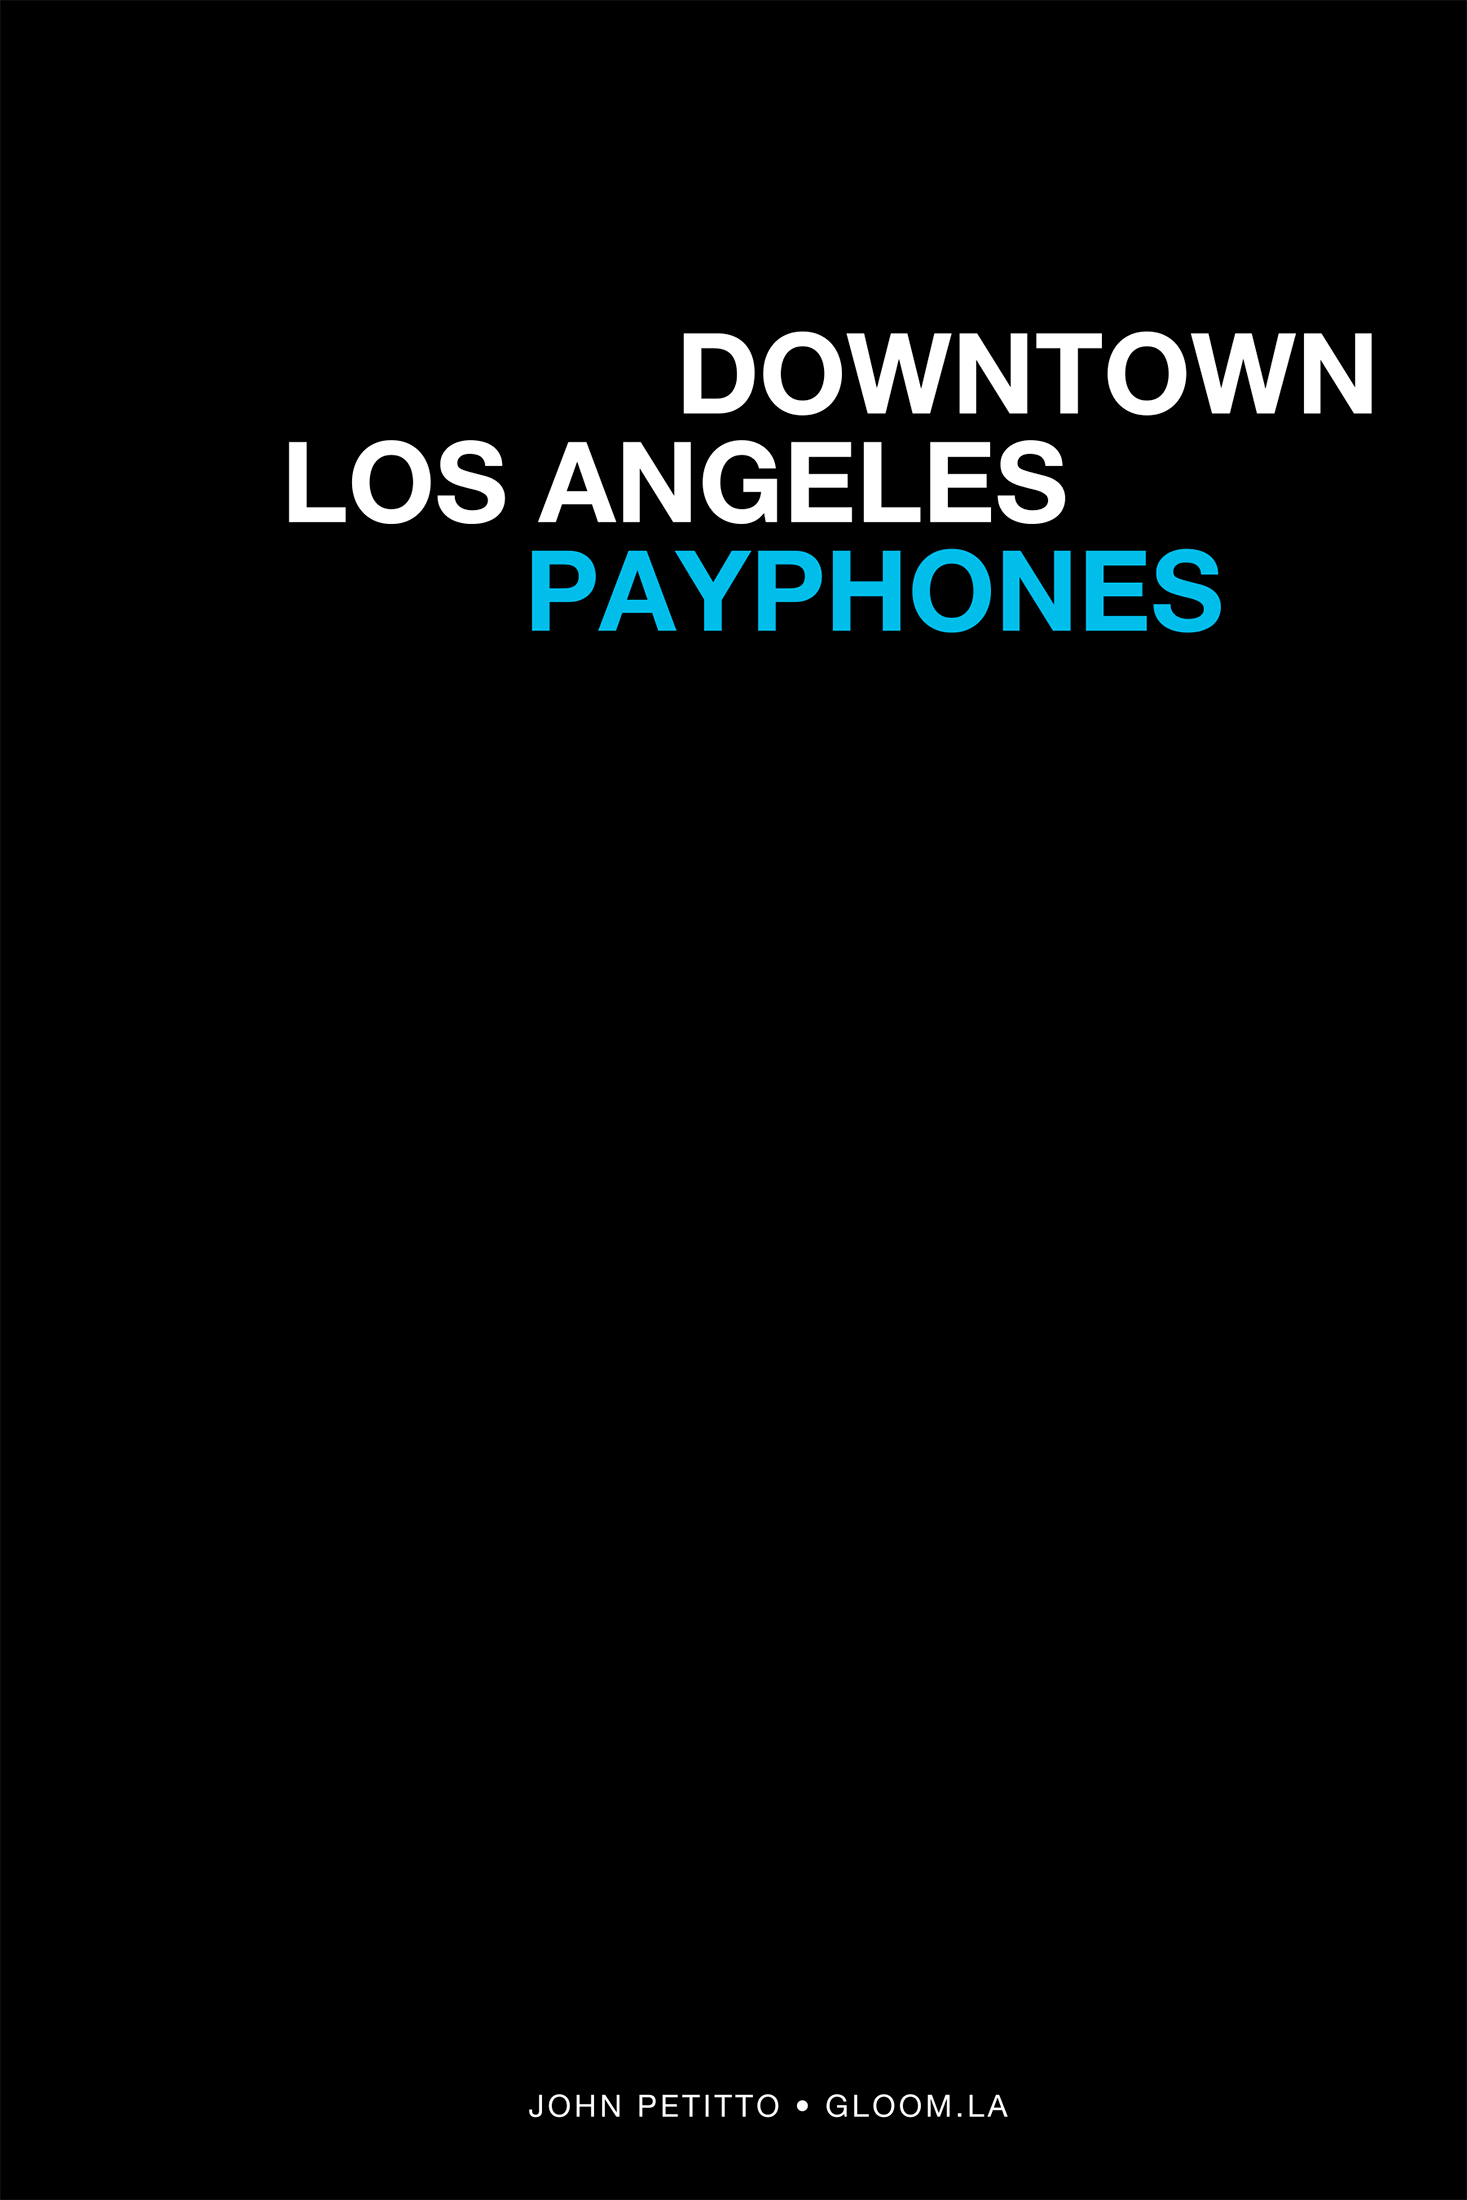 Image of Downtown Los Angeles Payphones